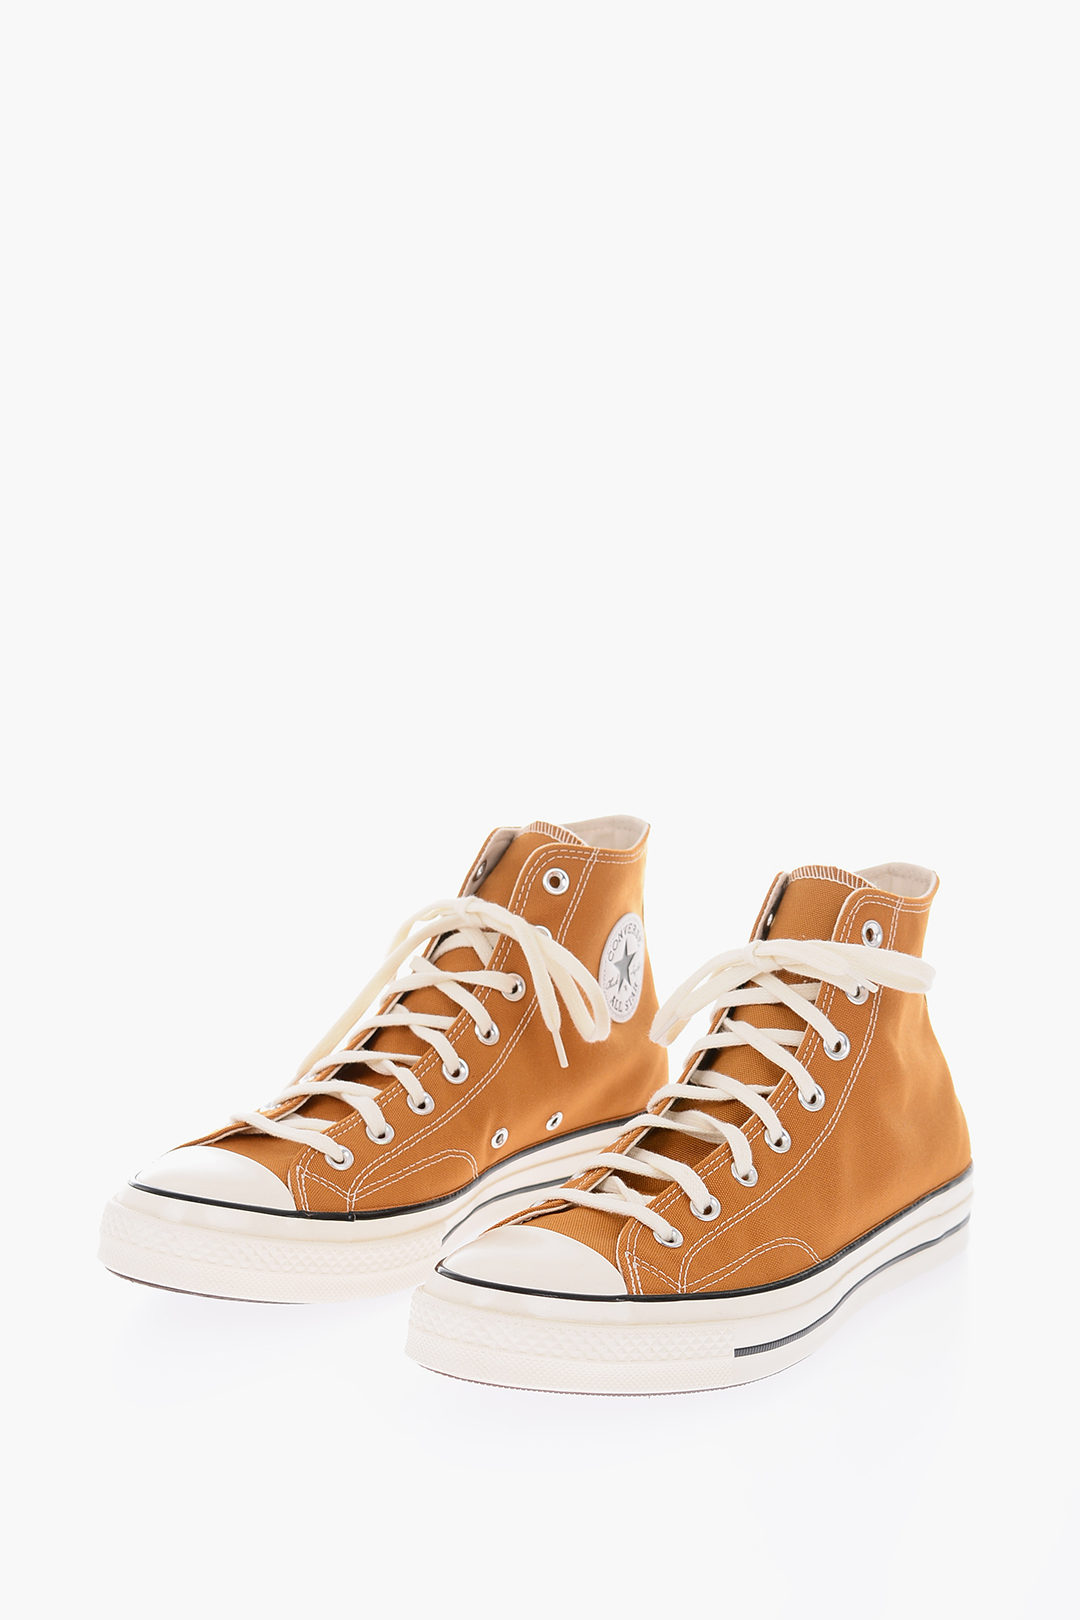 Converse ALL STAR CHUCK TAYLOR cotton high-top sneakers men - Glamood Outlet